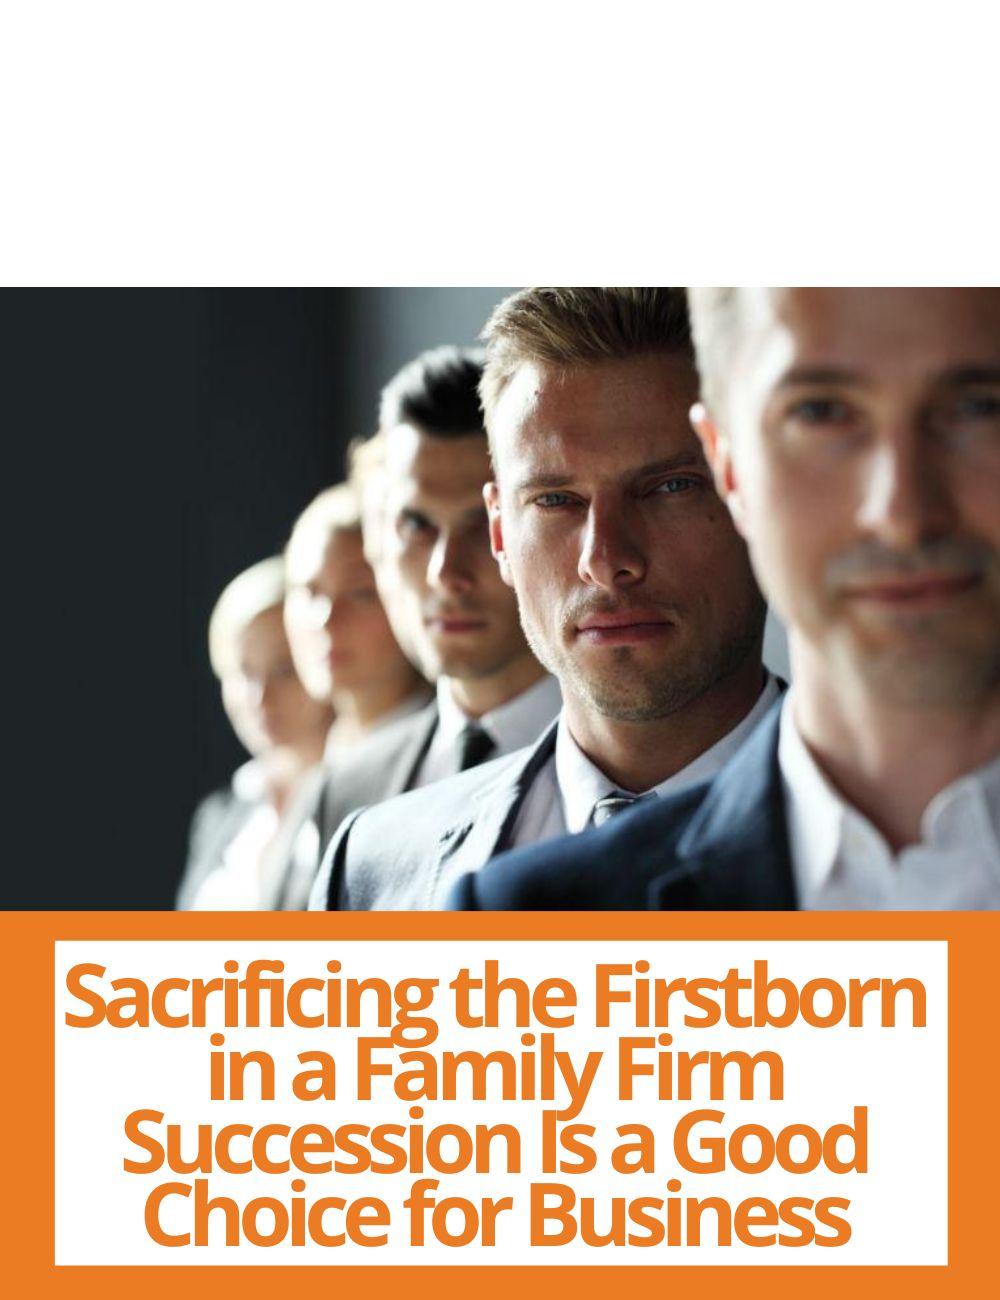 Link to related stories. Image: a group of entrepreneurs. Story headline: Sacrificing the Firstborn in a Family Firm Succession Is a Good Choice for Business, a New Study Explains